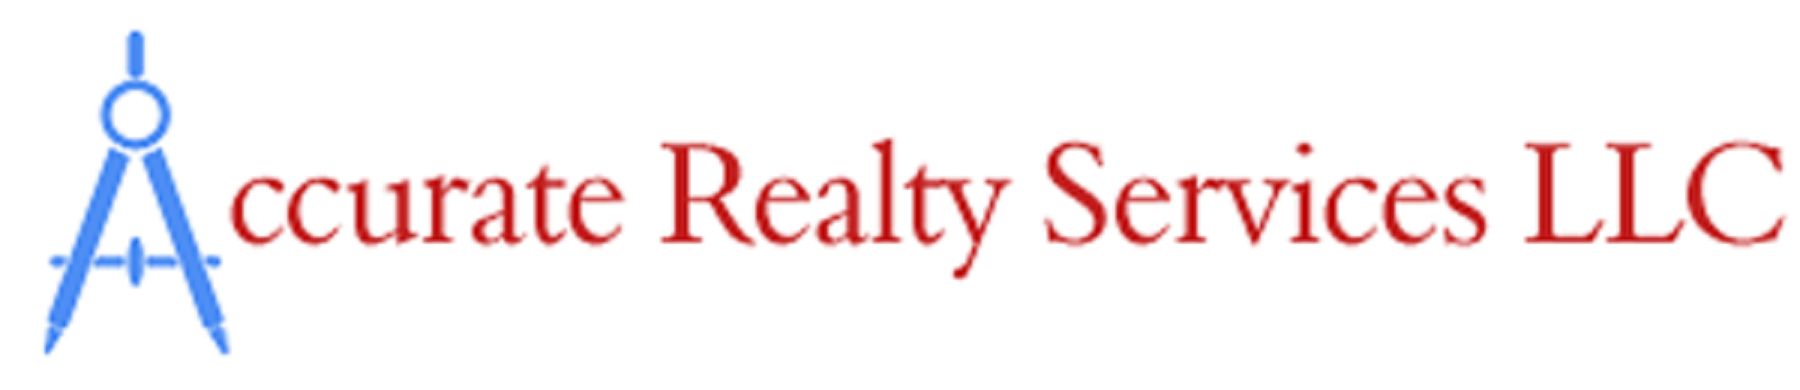 Accurate Realty Services, LLC Logo